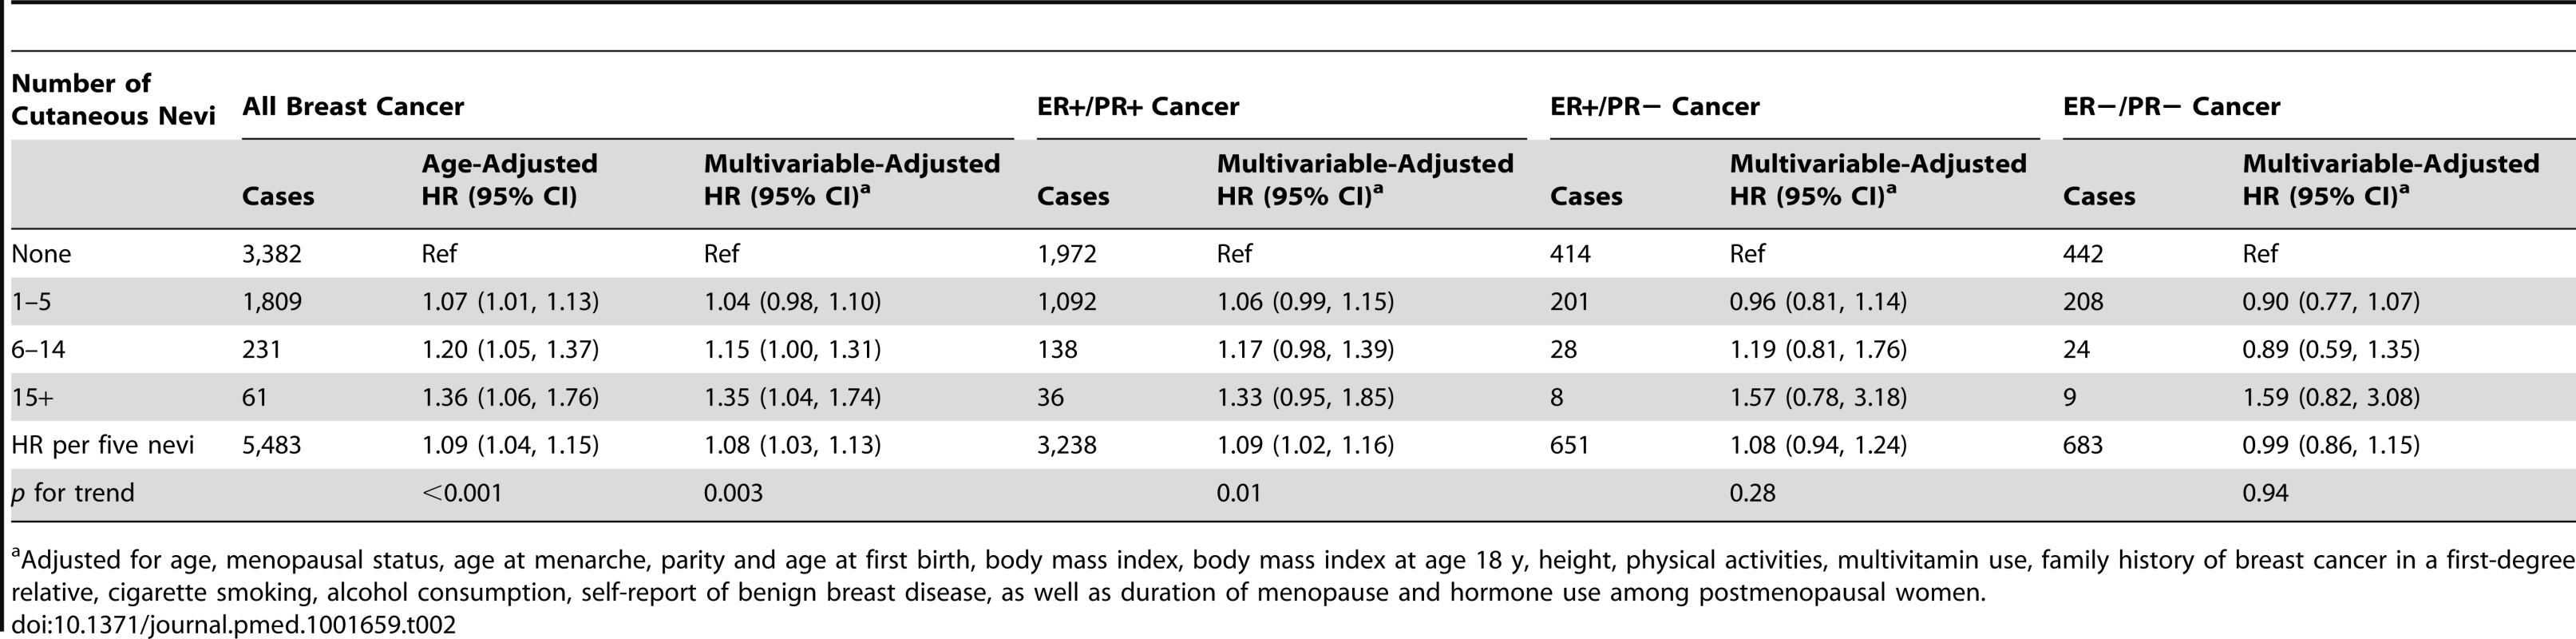 The number of cutaneous nevi and breast cancer risk by estrogen and progesterone receptor status.